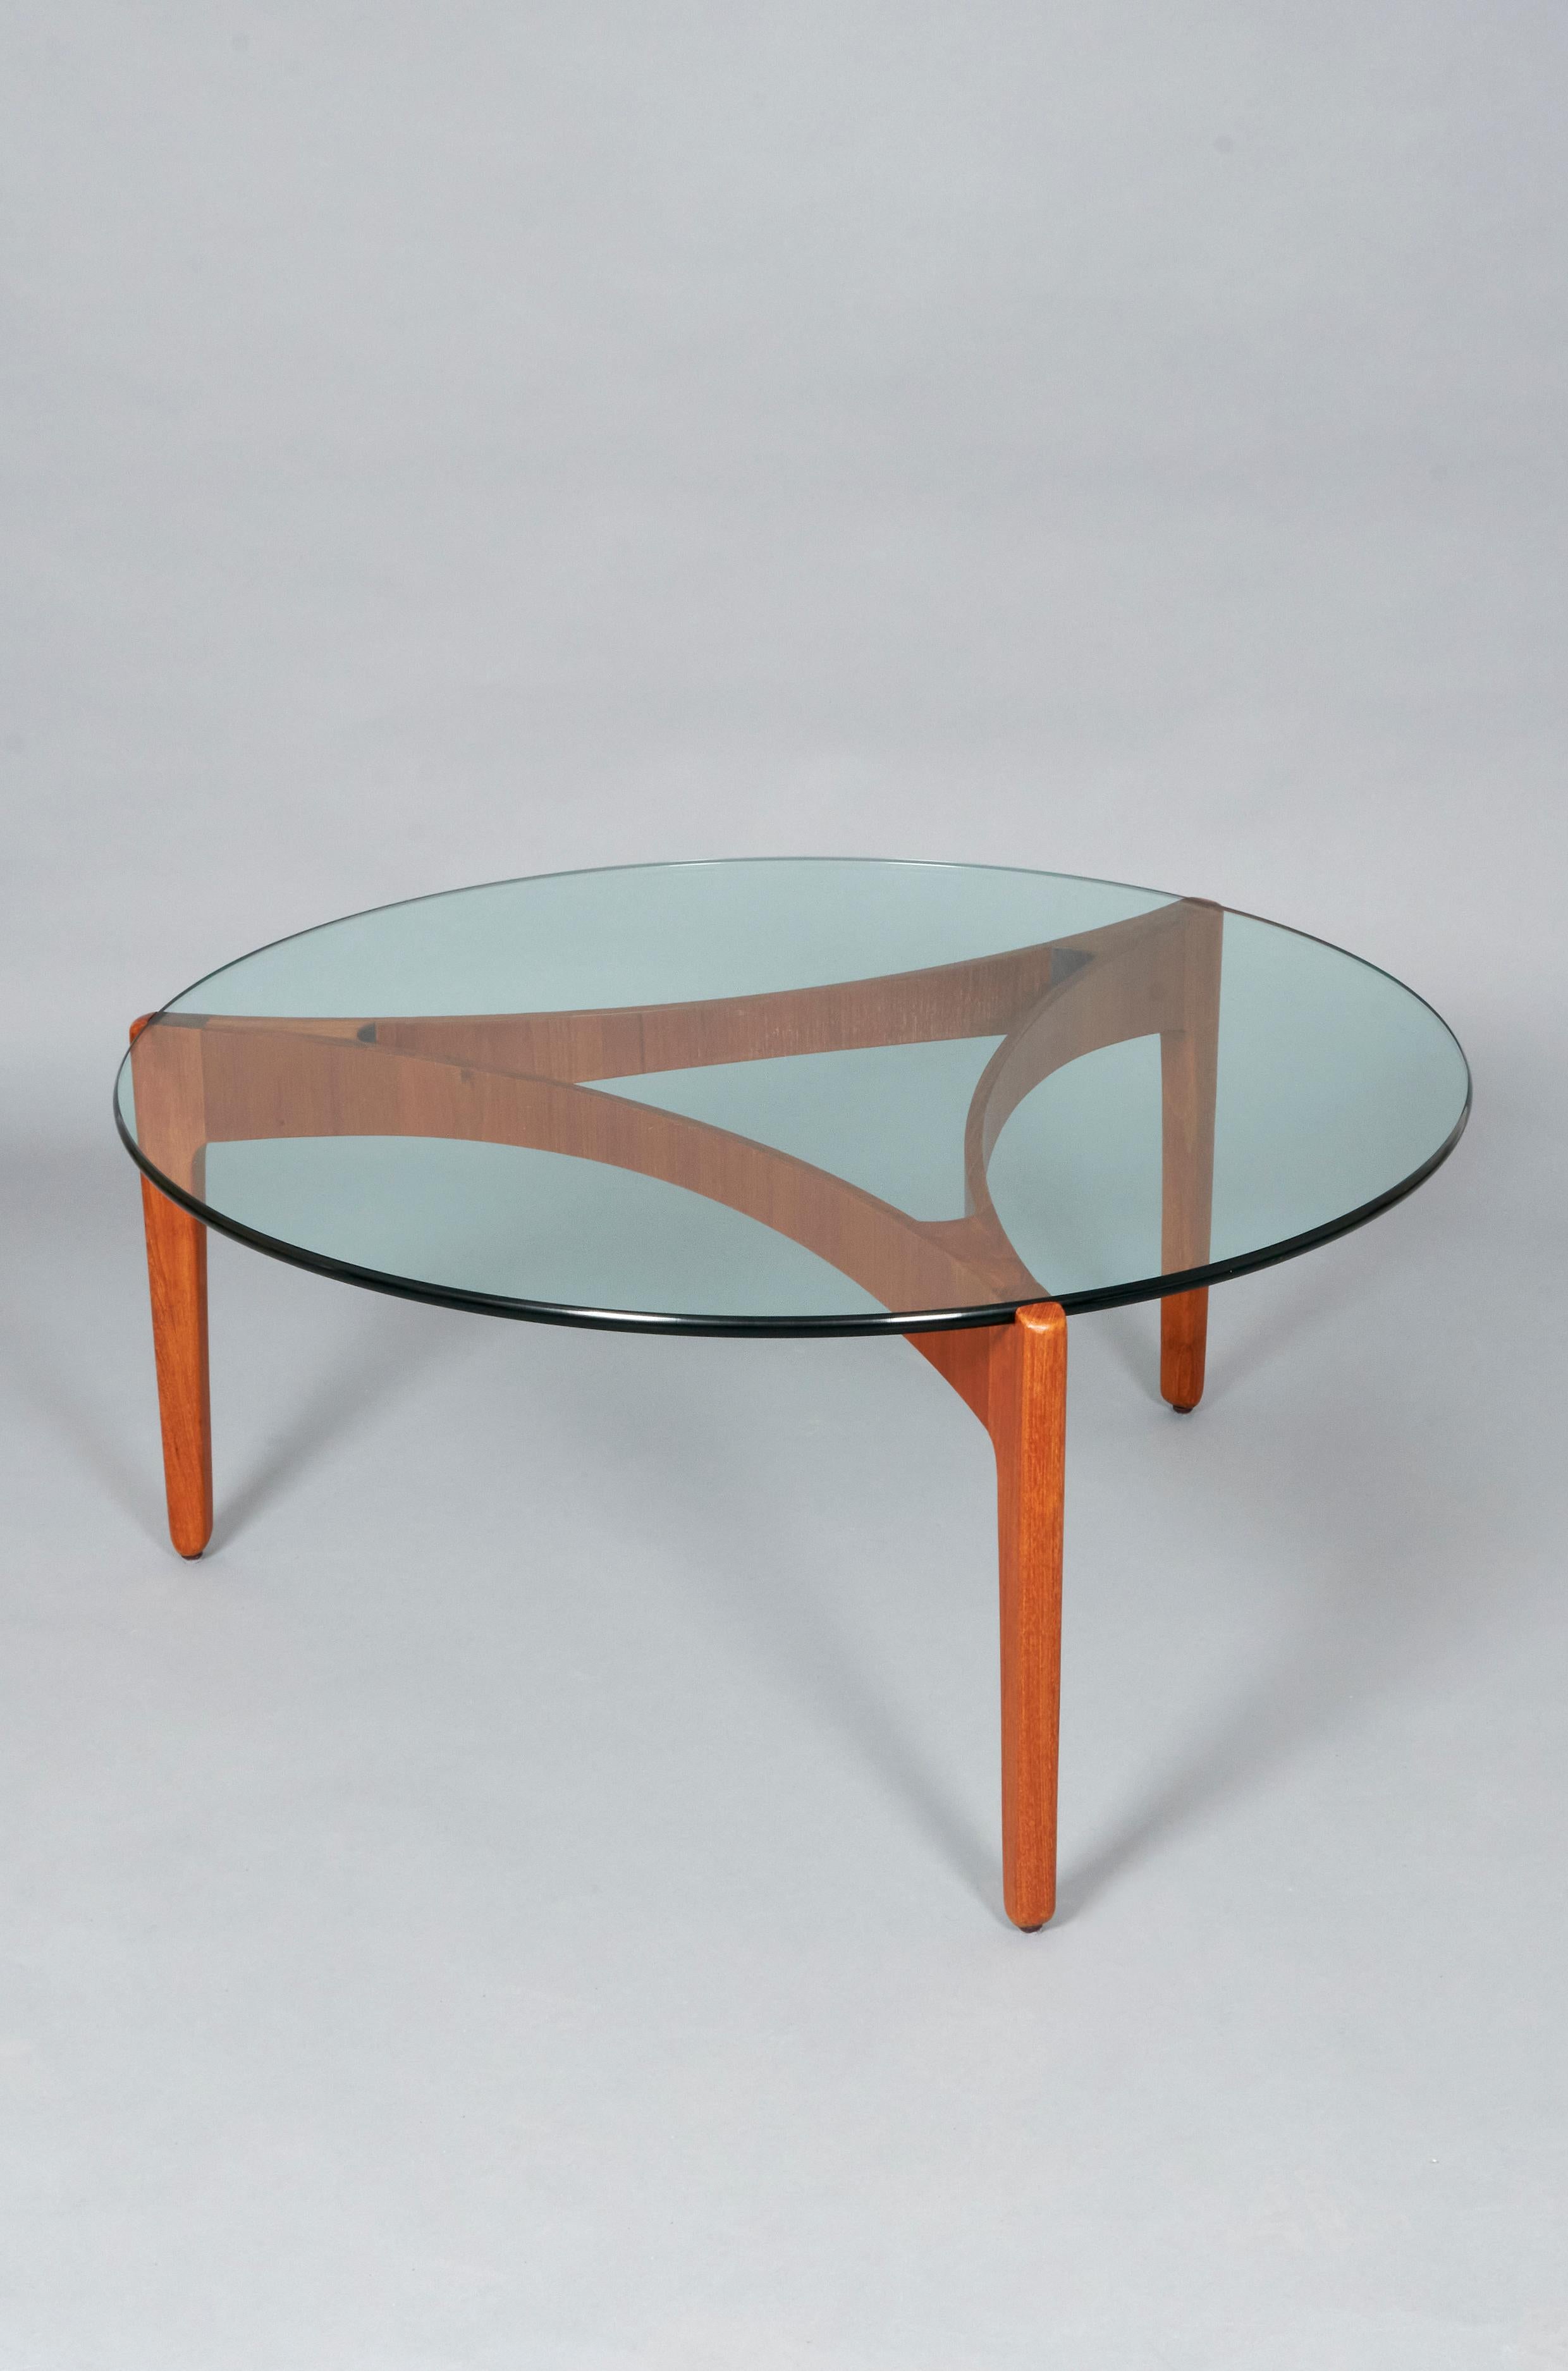 Midcentury Modern Sven Ellekaer Teak and Glass Coffee Table In Good Condition For Sale In Madrid, ES